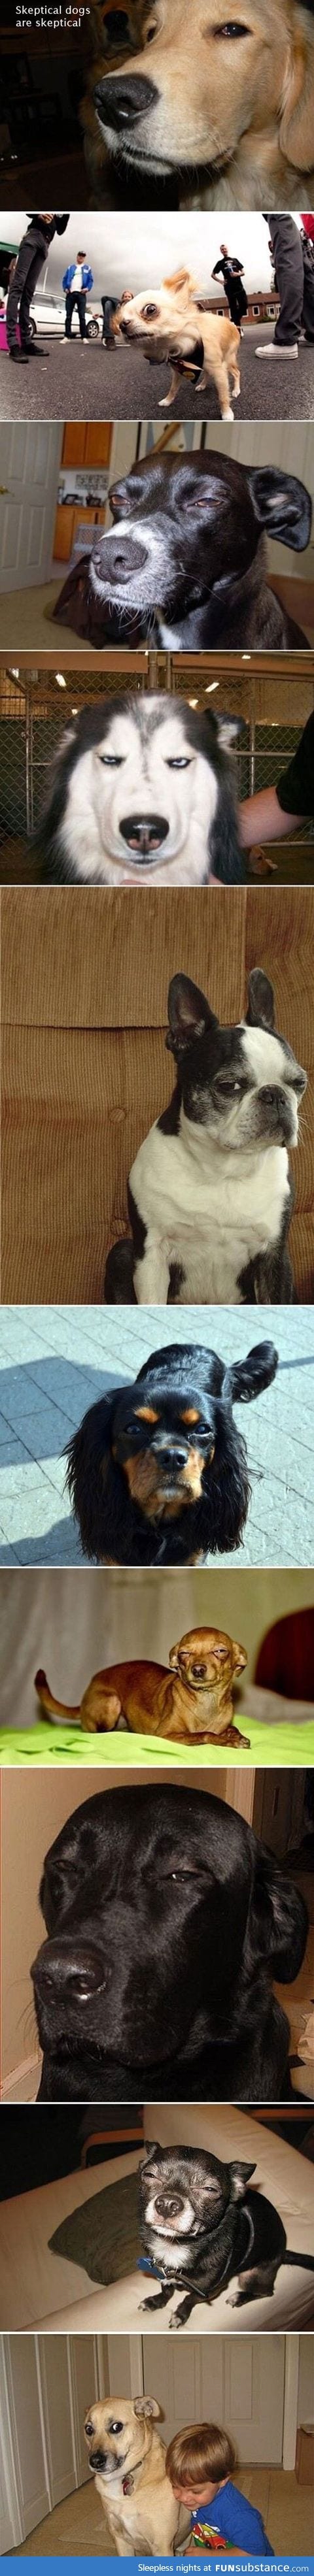 Skeptical dogs are skeptical.